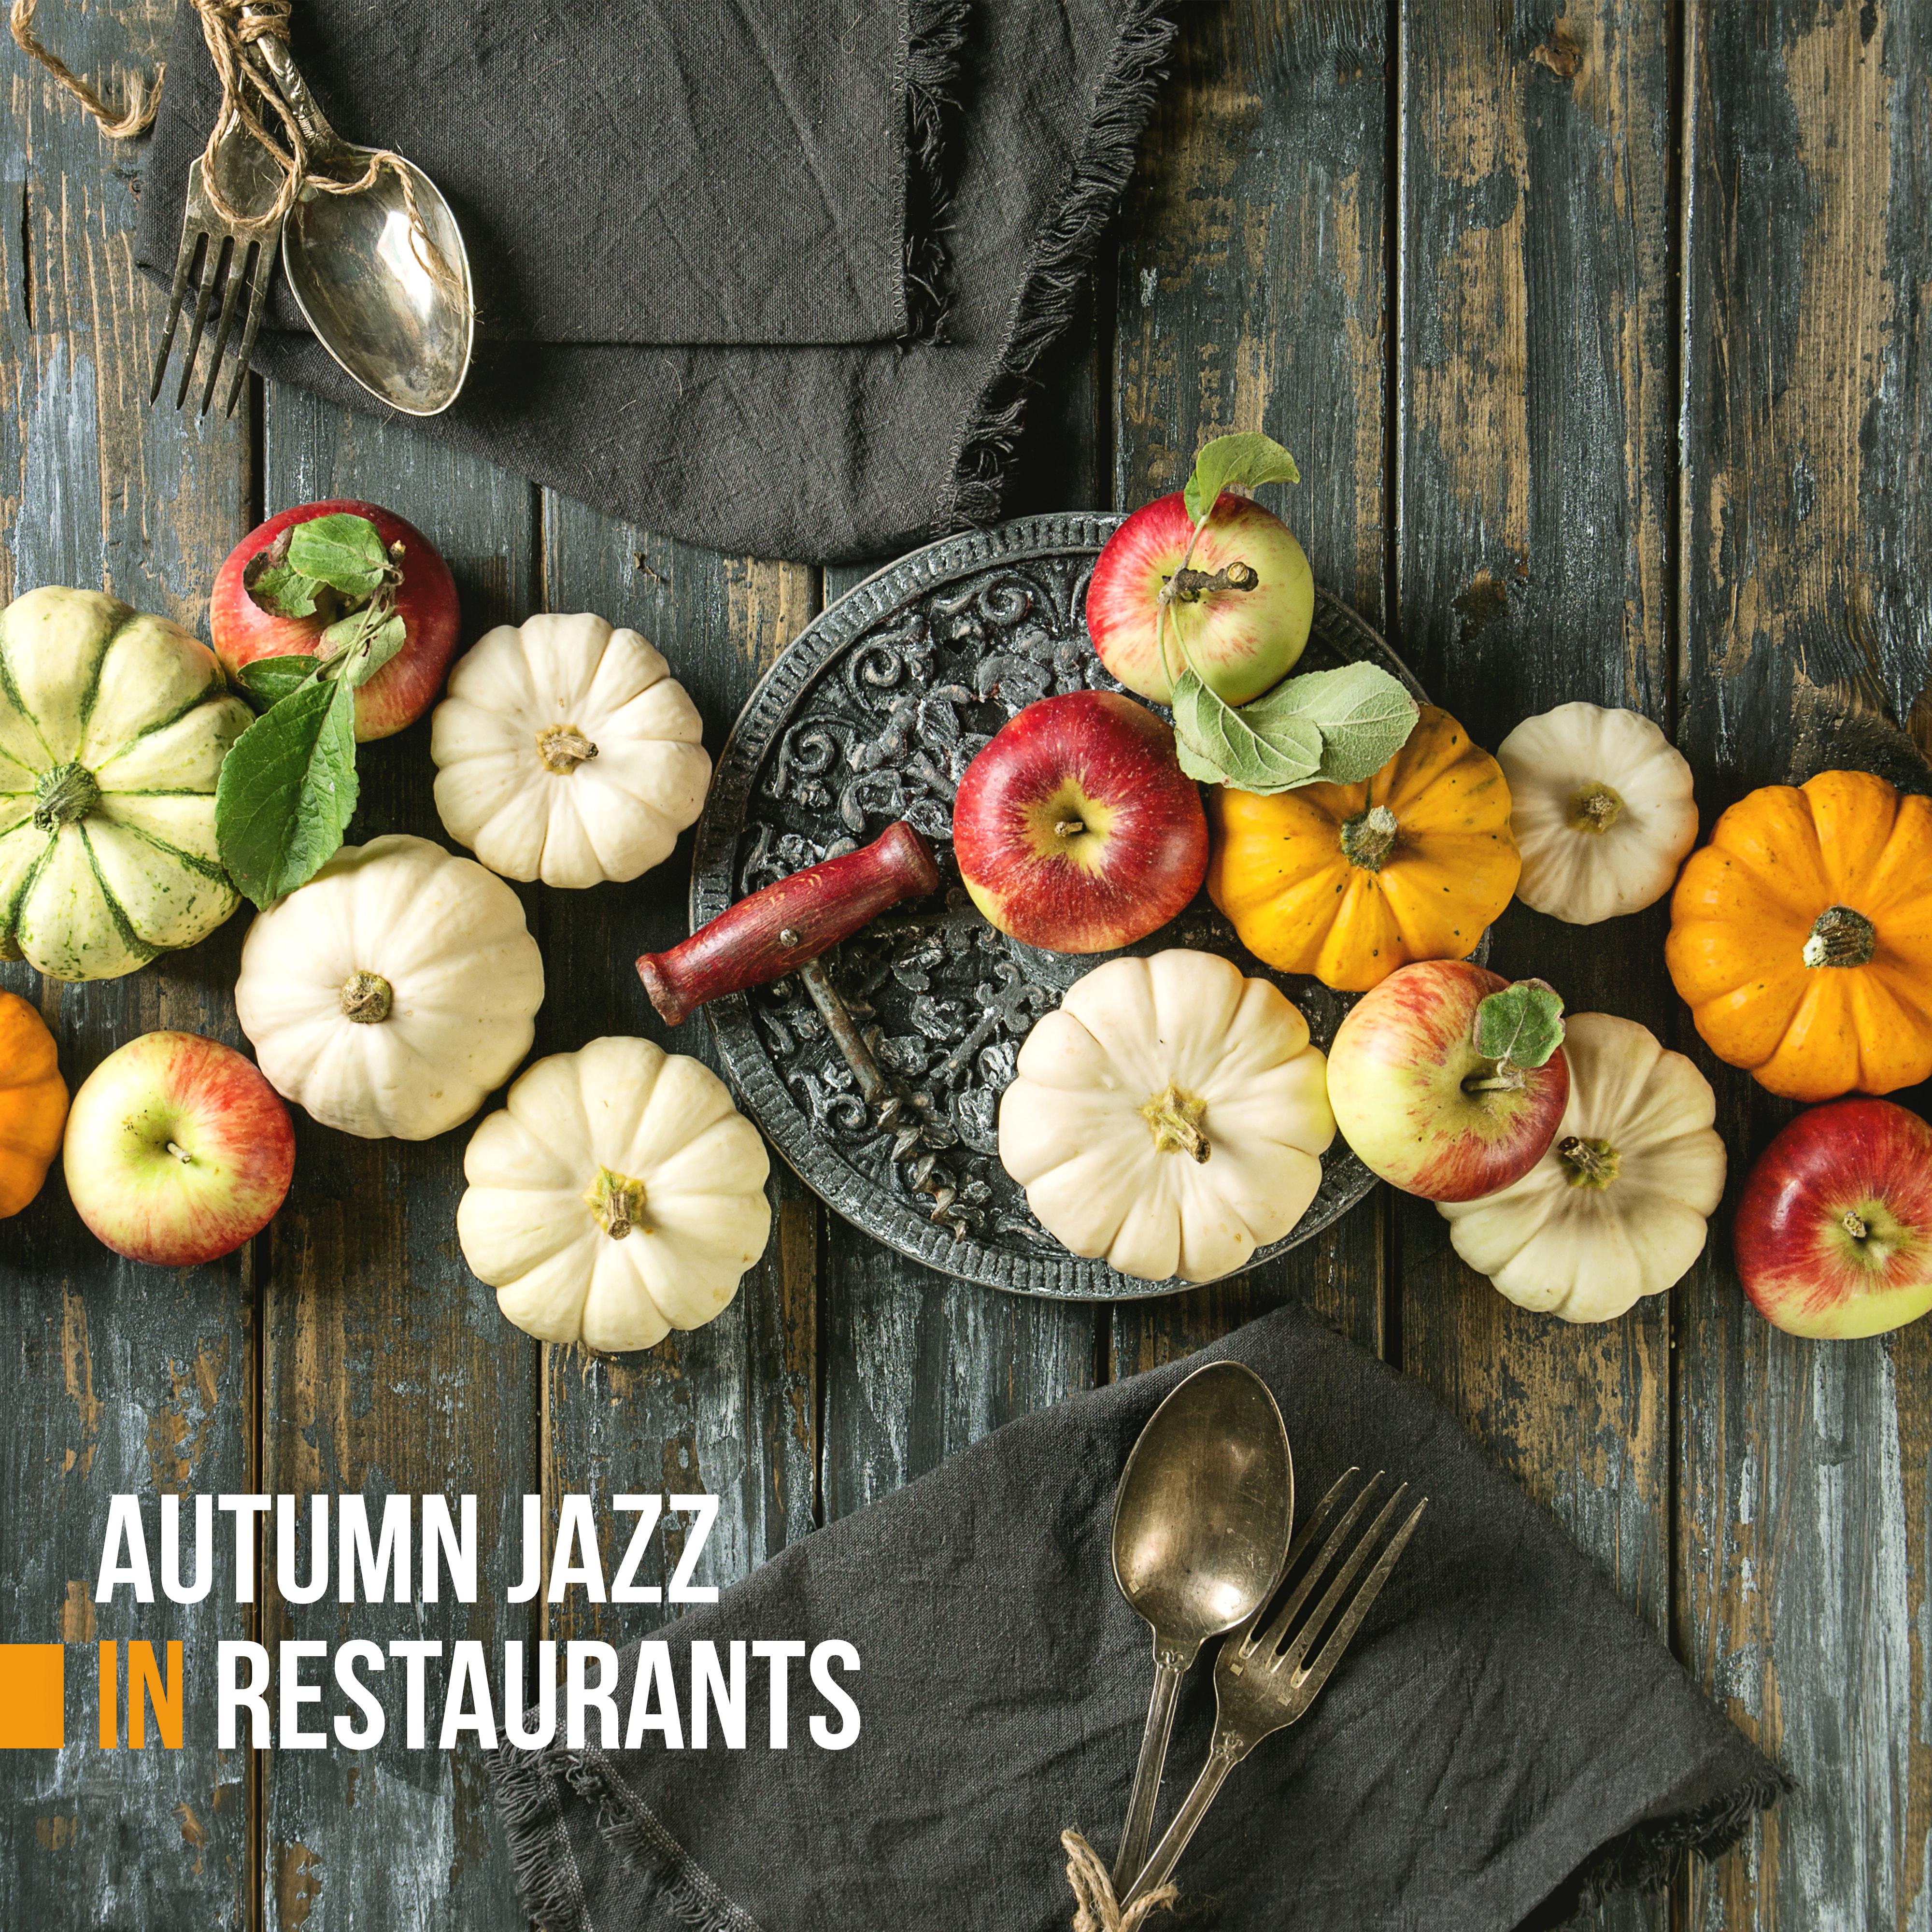 Autumn Jazz in Restaurants: Calm Melodies to Exquisite Meals, Favorite Dishes, Delicious Desserts and Other Delicacies, a Romantic Dinner or a Quiet Lunch Time